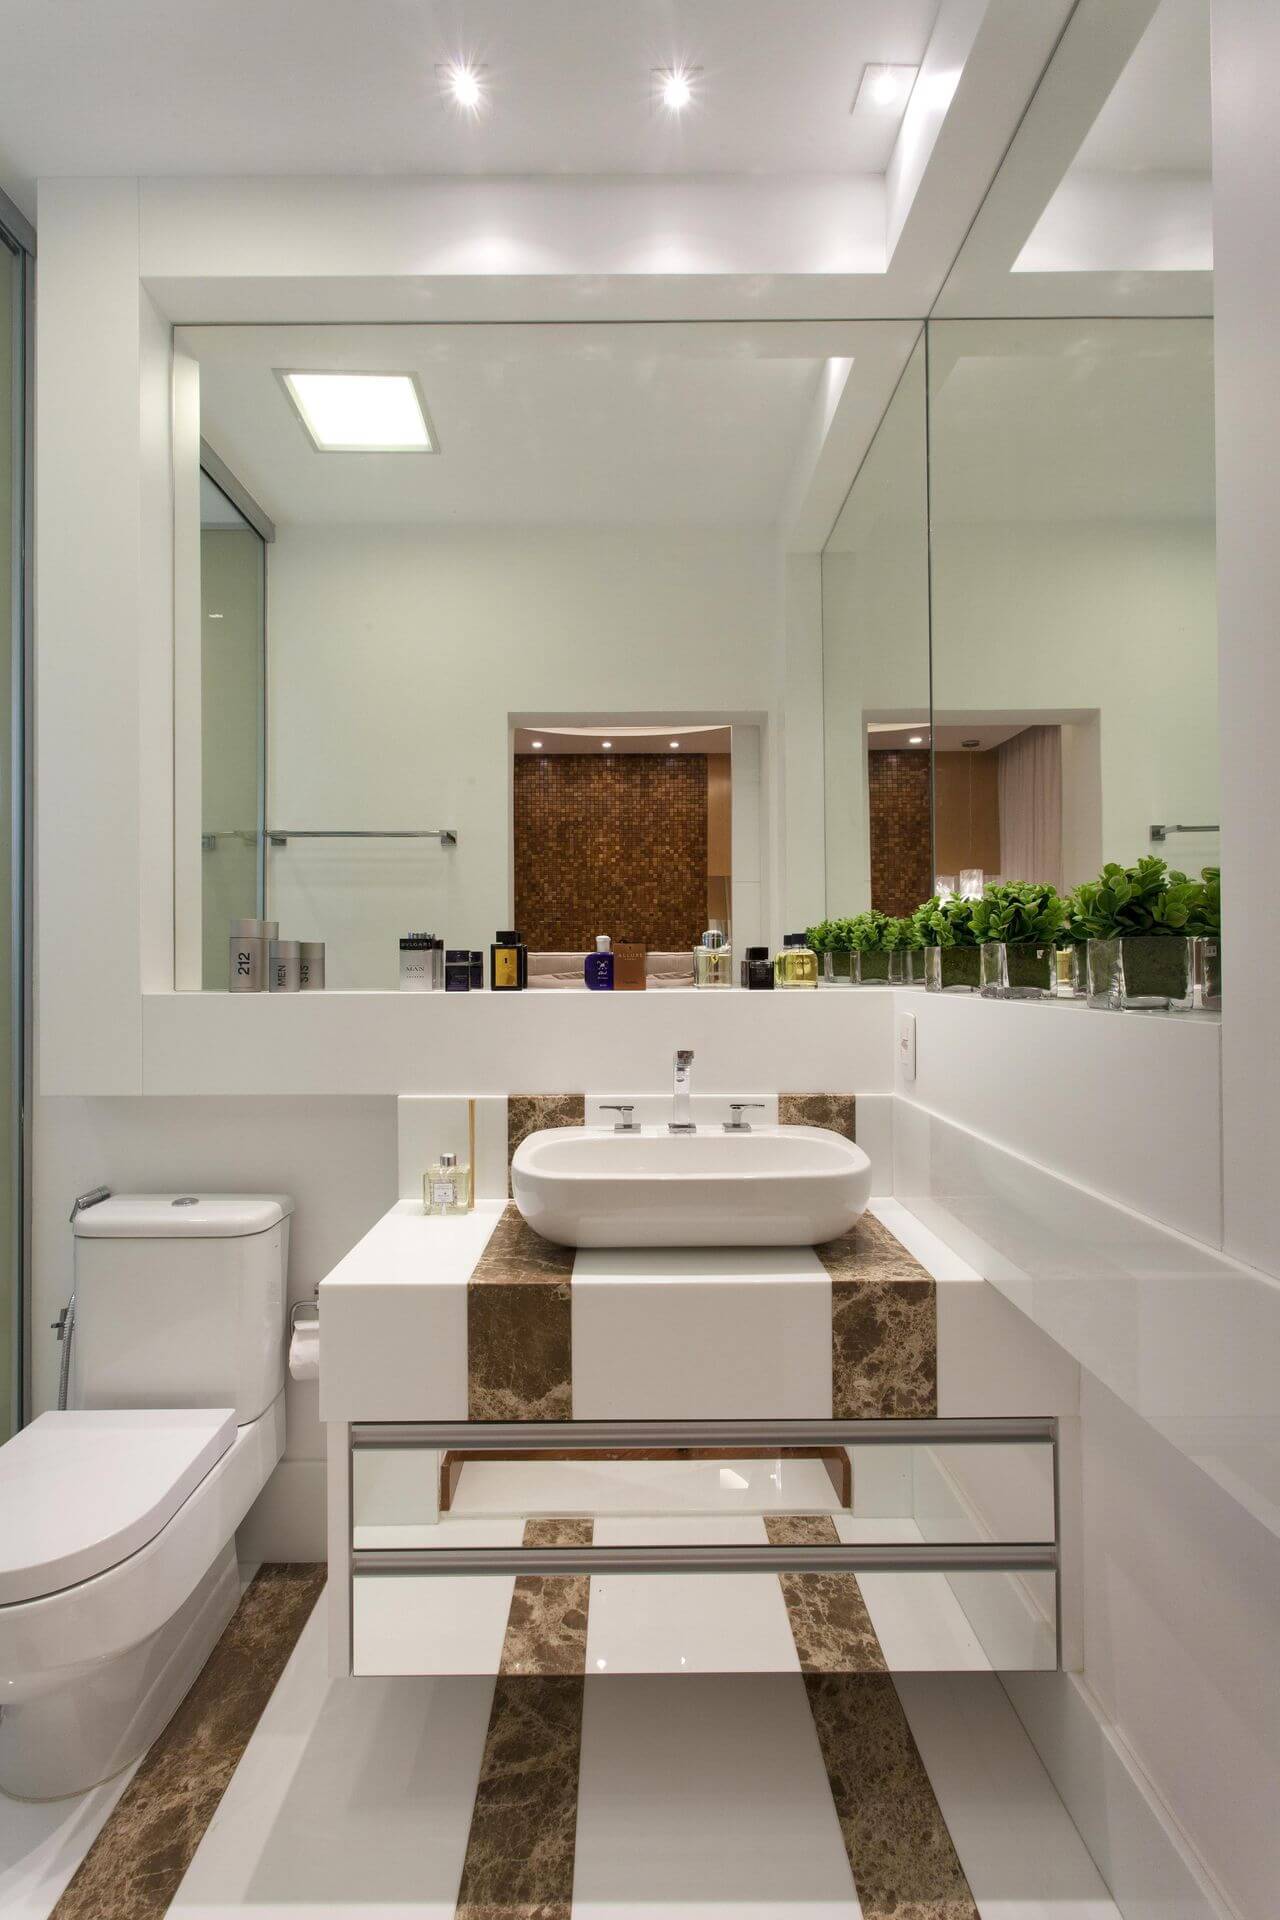 3- Brown and white bathroom